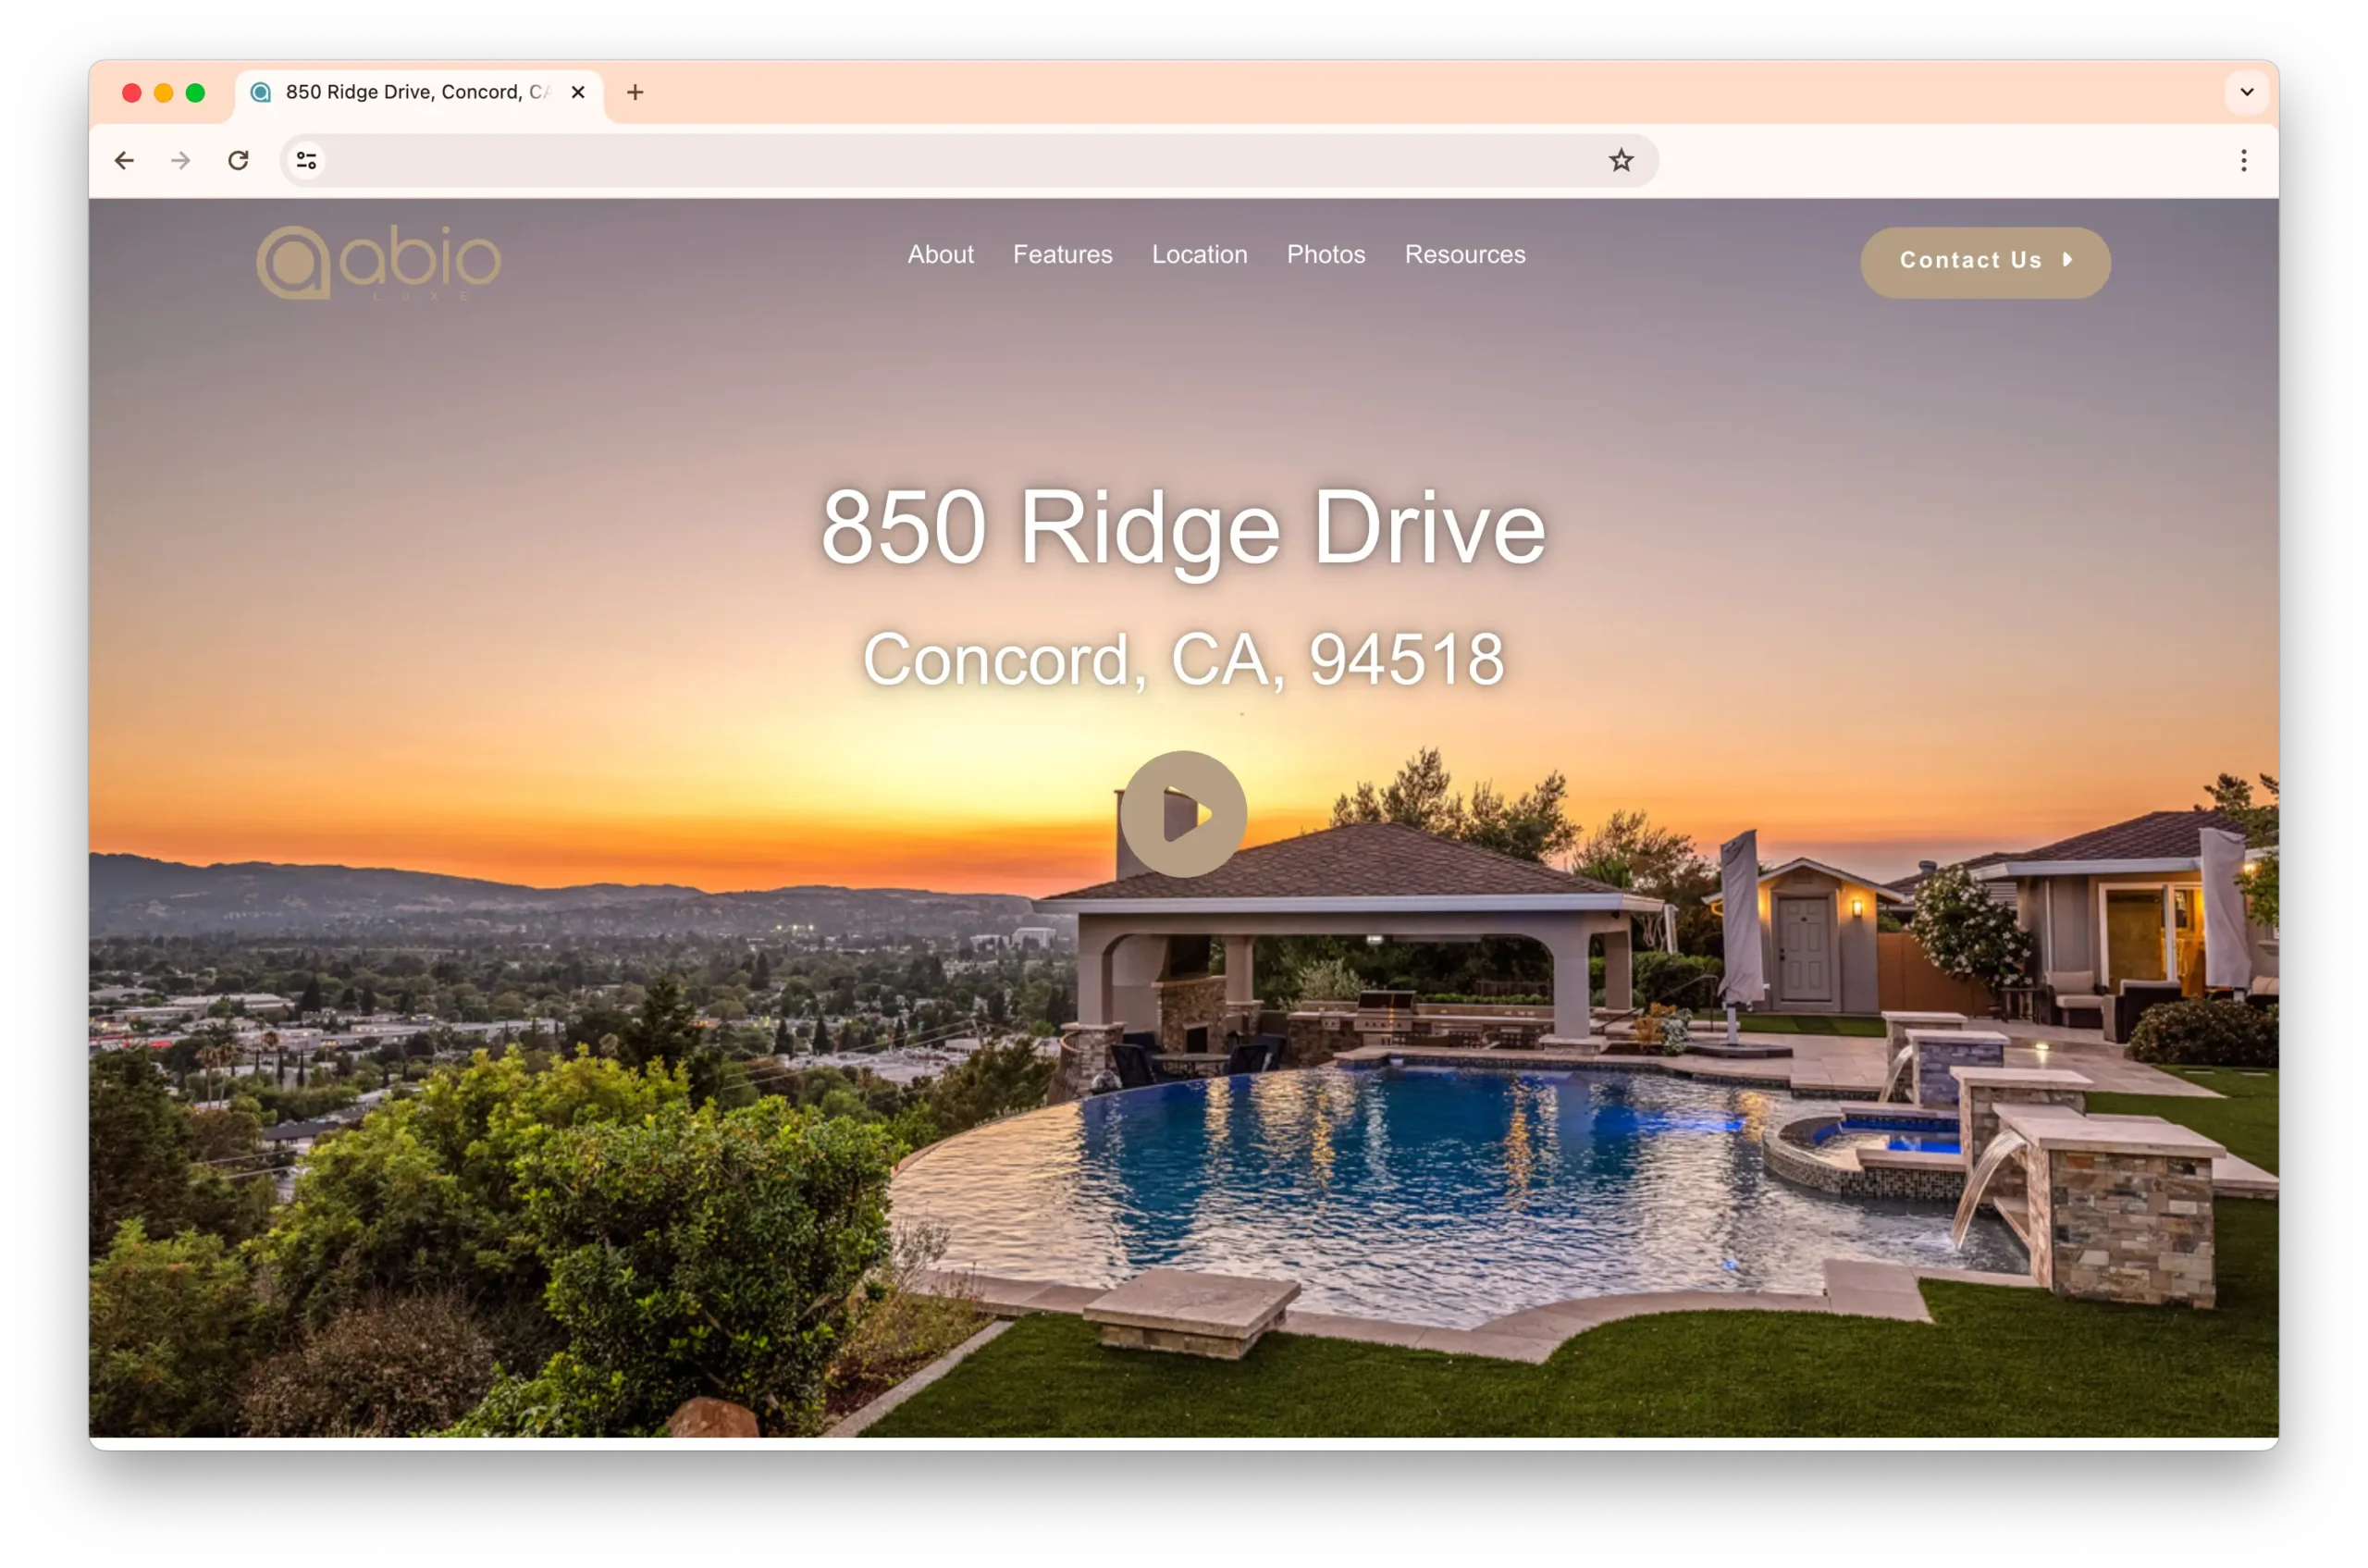 A property listing for 850 Ridge Drive, Concord, CA 94518, on Abio Luxe. The image shows a luxurious backyard with a pool and a view of the sunset over the city.